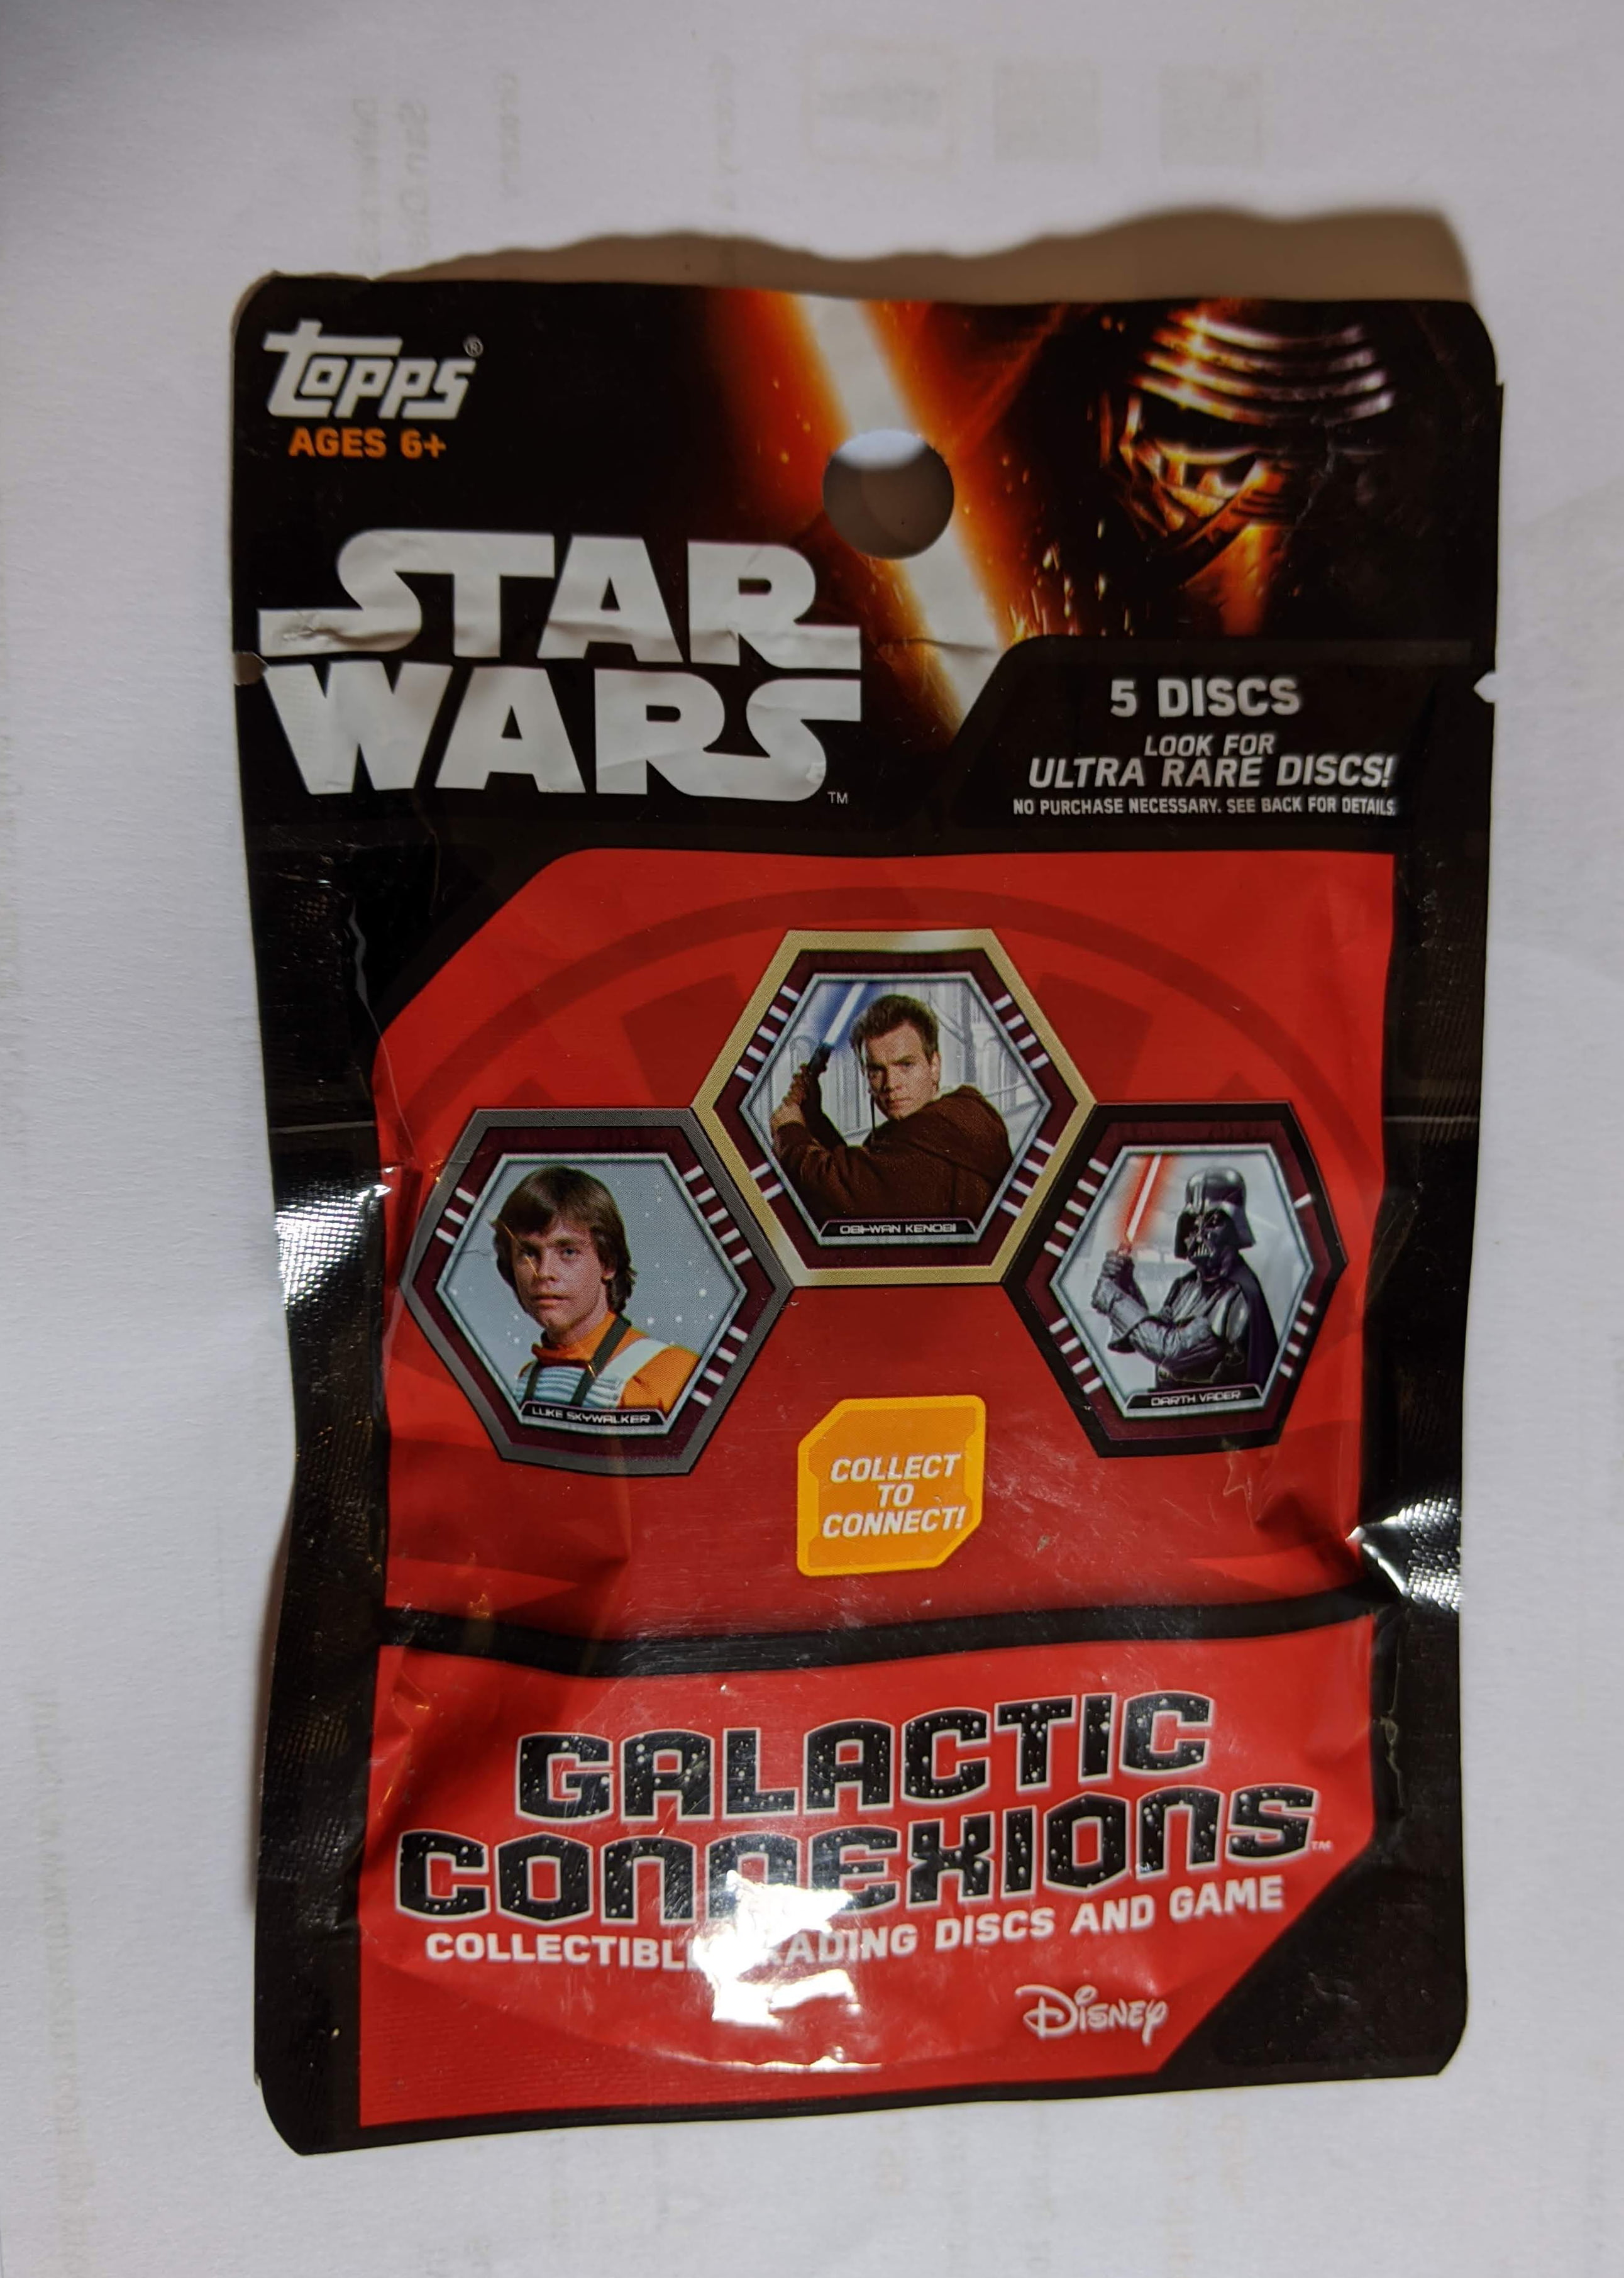 TOPPS DISNEY STAR WARS GALACTIC CONNEXIONS LOT OF 5 PACKS=25 DISCS TOTAL 